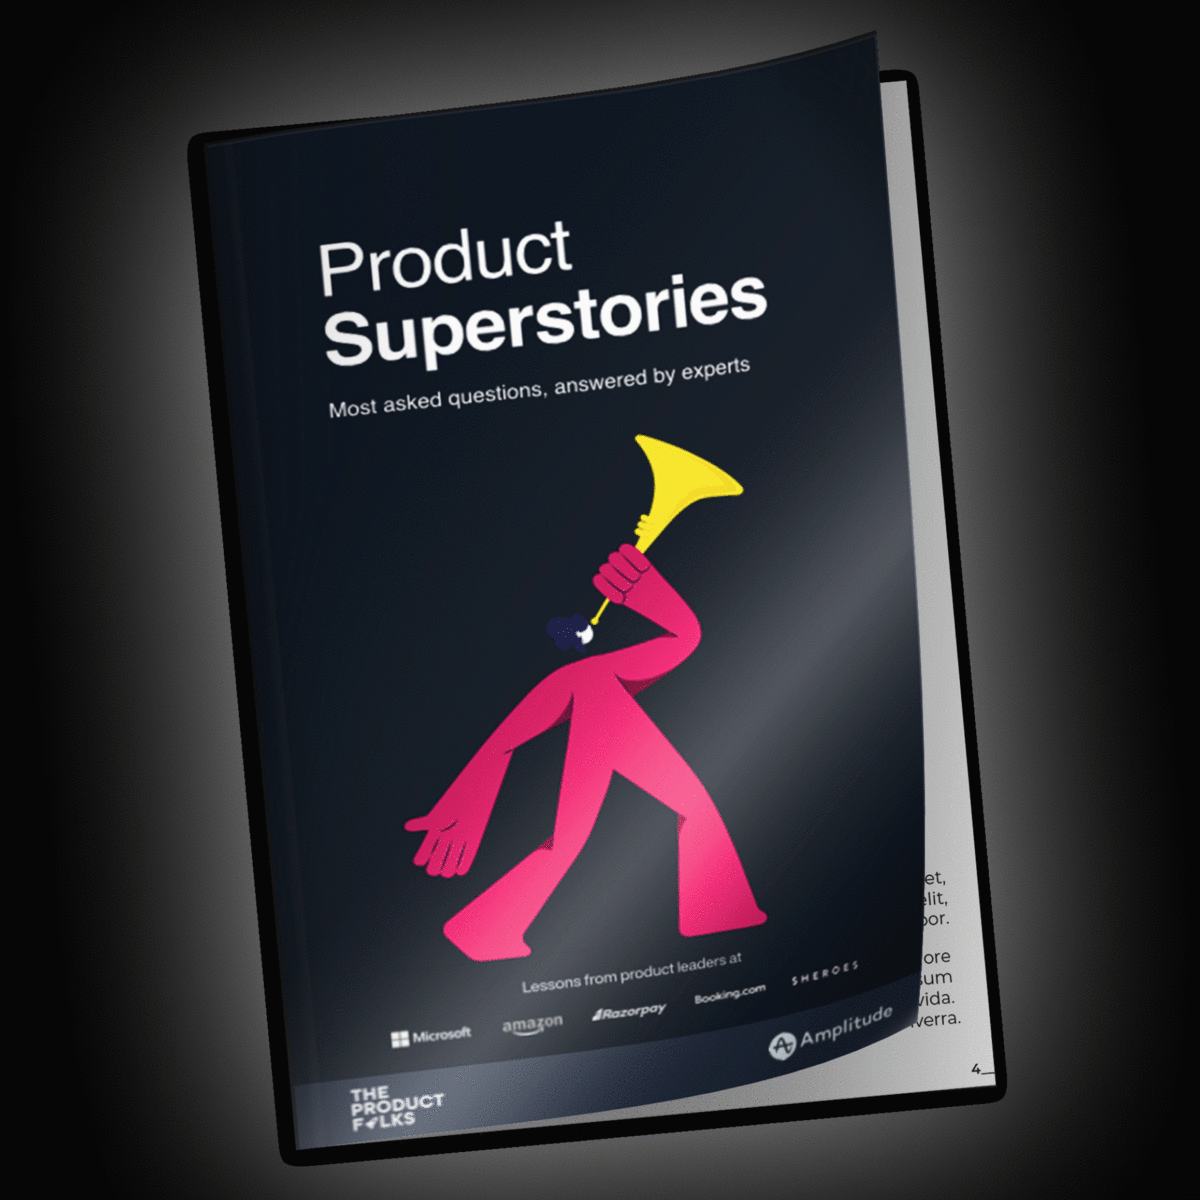 Product Superstories